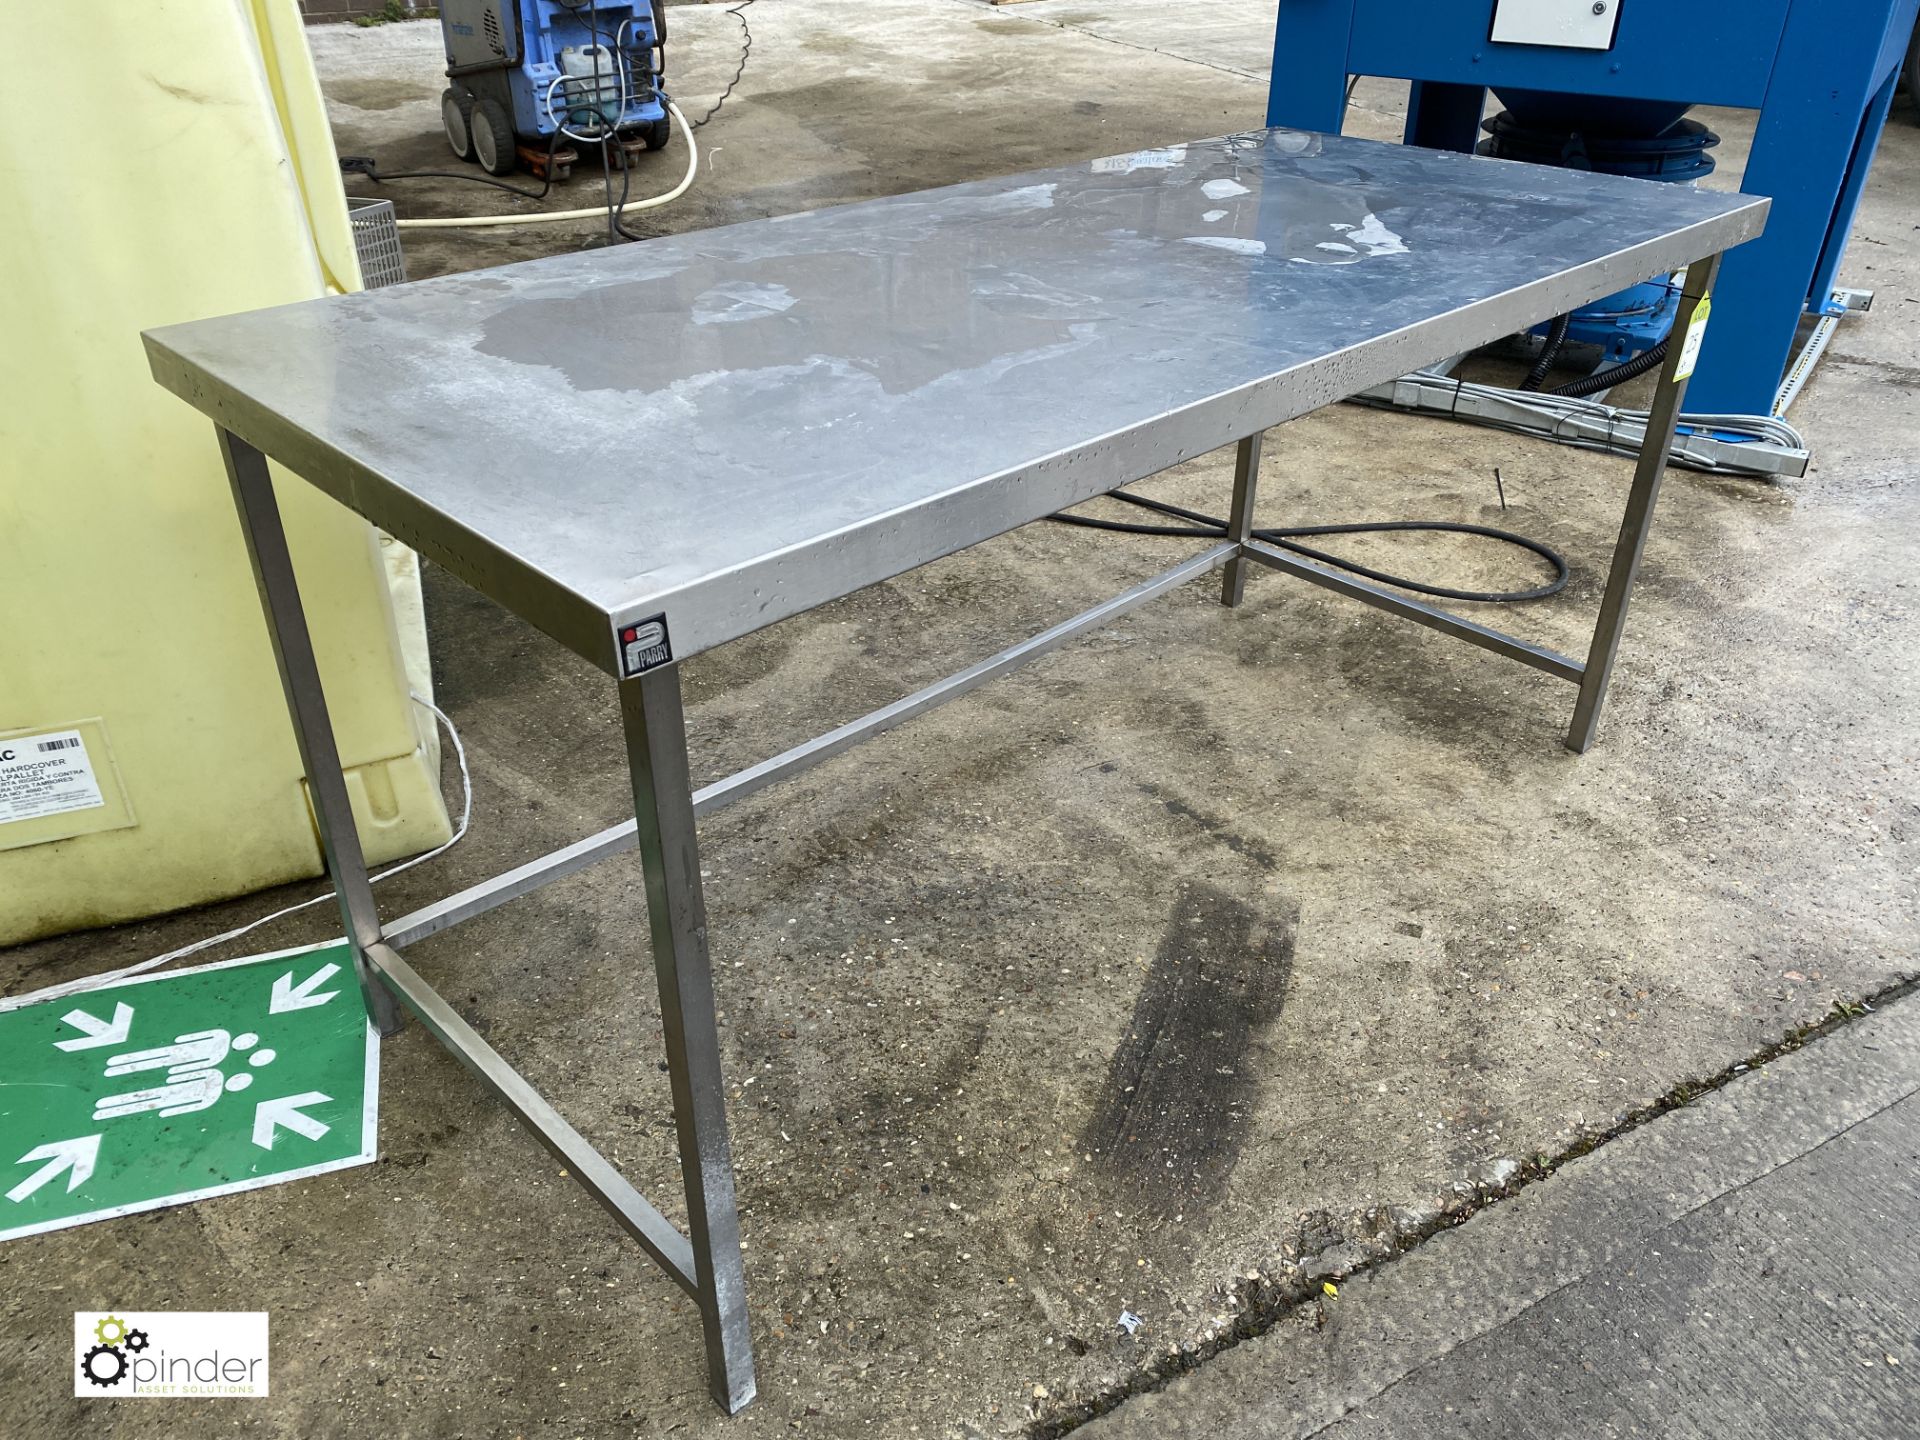 Parry stainless steel Preparation Table, 1800mm x 800mm (please note there is a lift out fee of £5 - Image 2 of 2